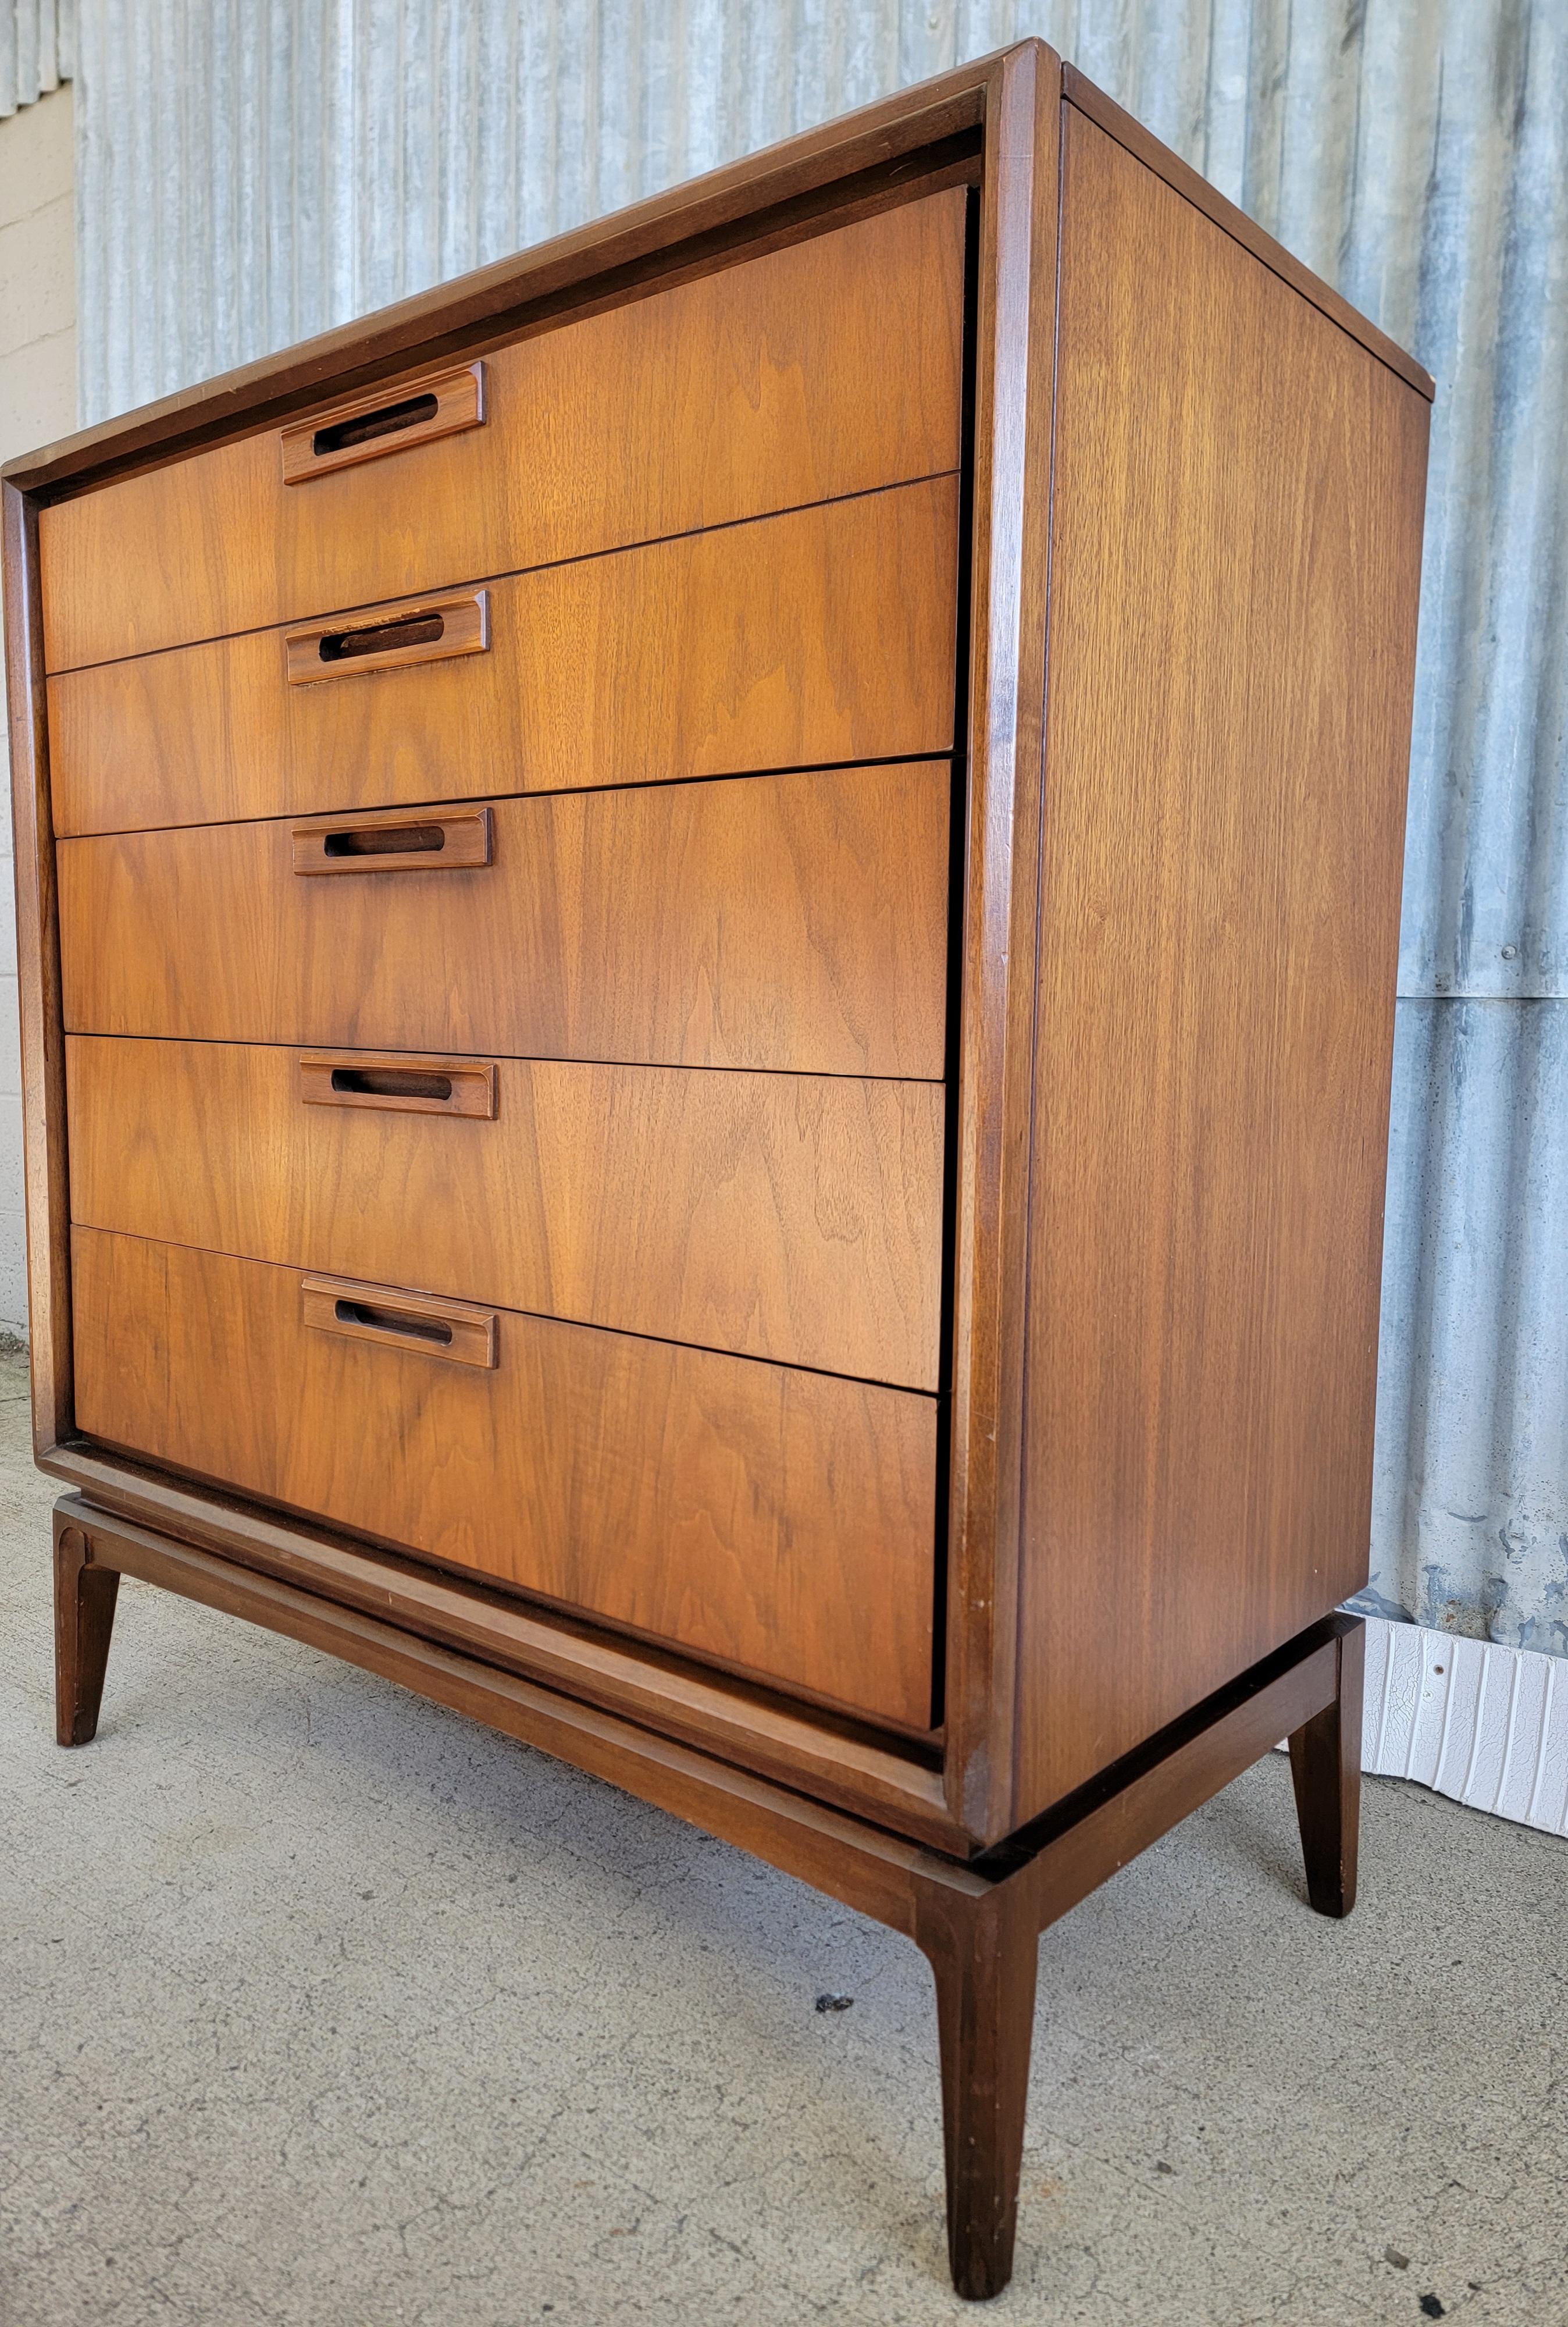 A walnut tall drawer low (highboy) dresser by United Furniture Company, circa. 1950. Fine craftsmanship with solid oak interior woods and dovetail construction. Dust panels between drawers and center drawer glide tracks. Very good original condition